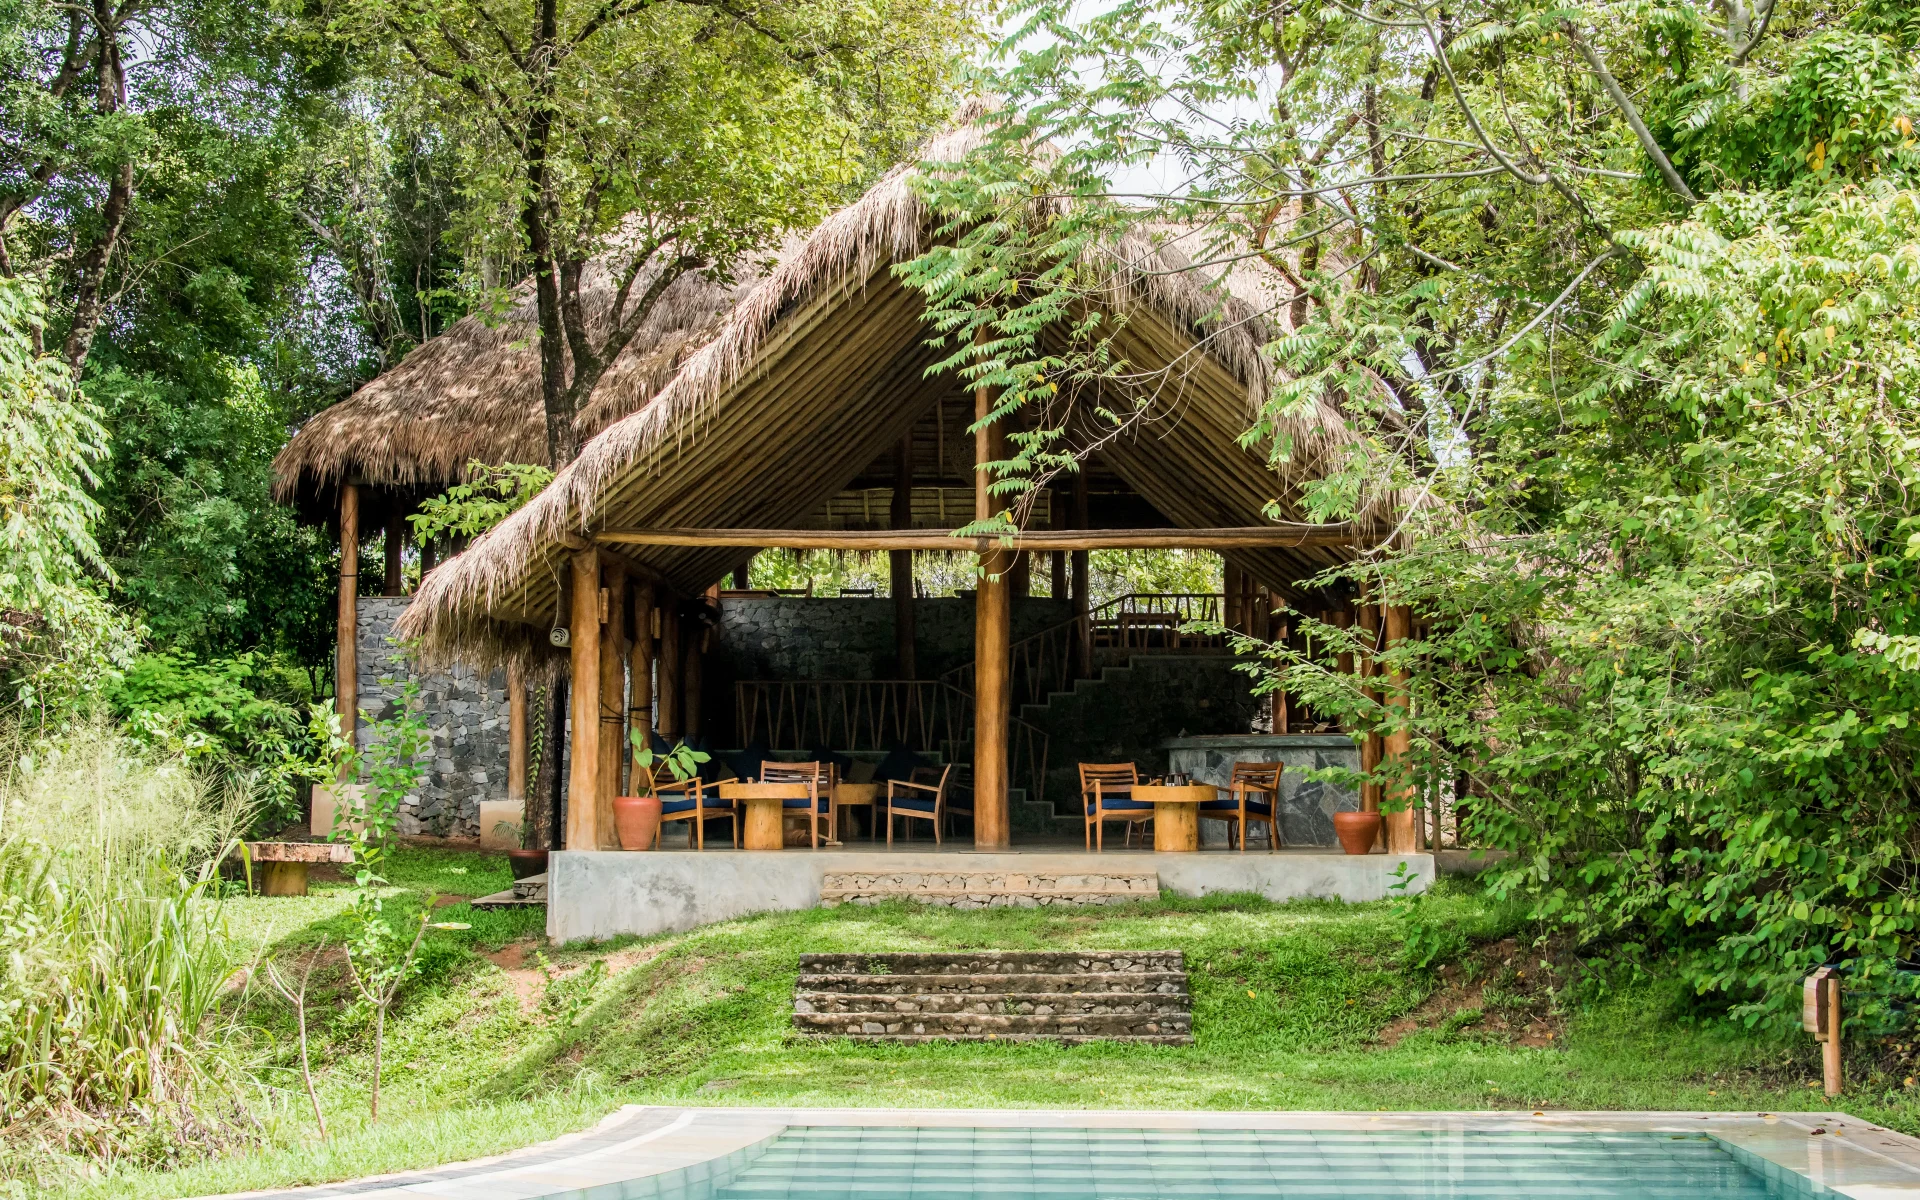 The poolside bar is in a thatched-roof hut. Steps lead down to the outdoor pool, encased by foliage.